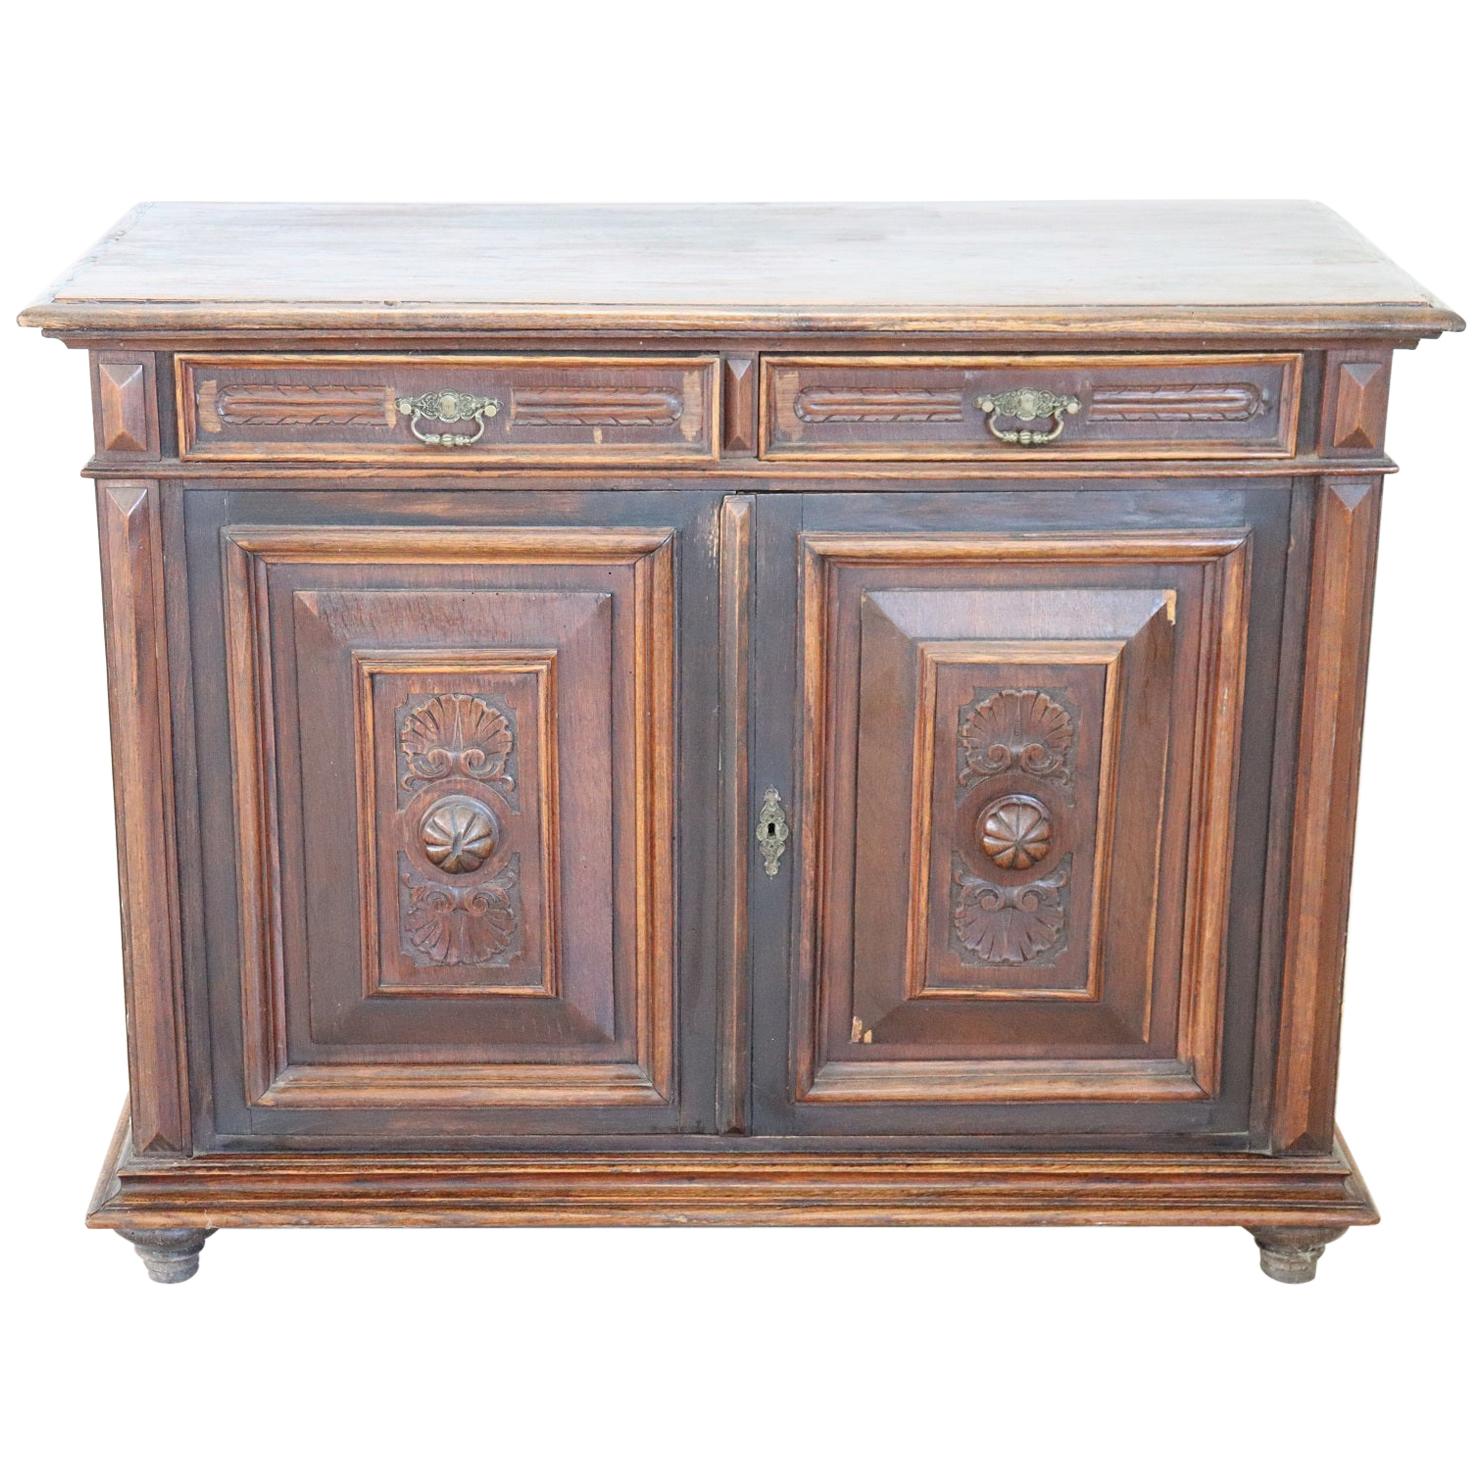 19th Century Italian Carved Chestnut Sideboard or Buffet